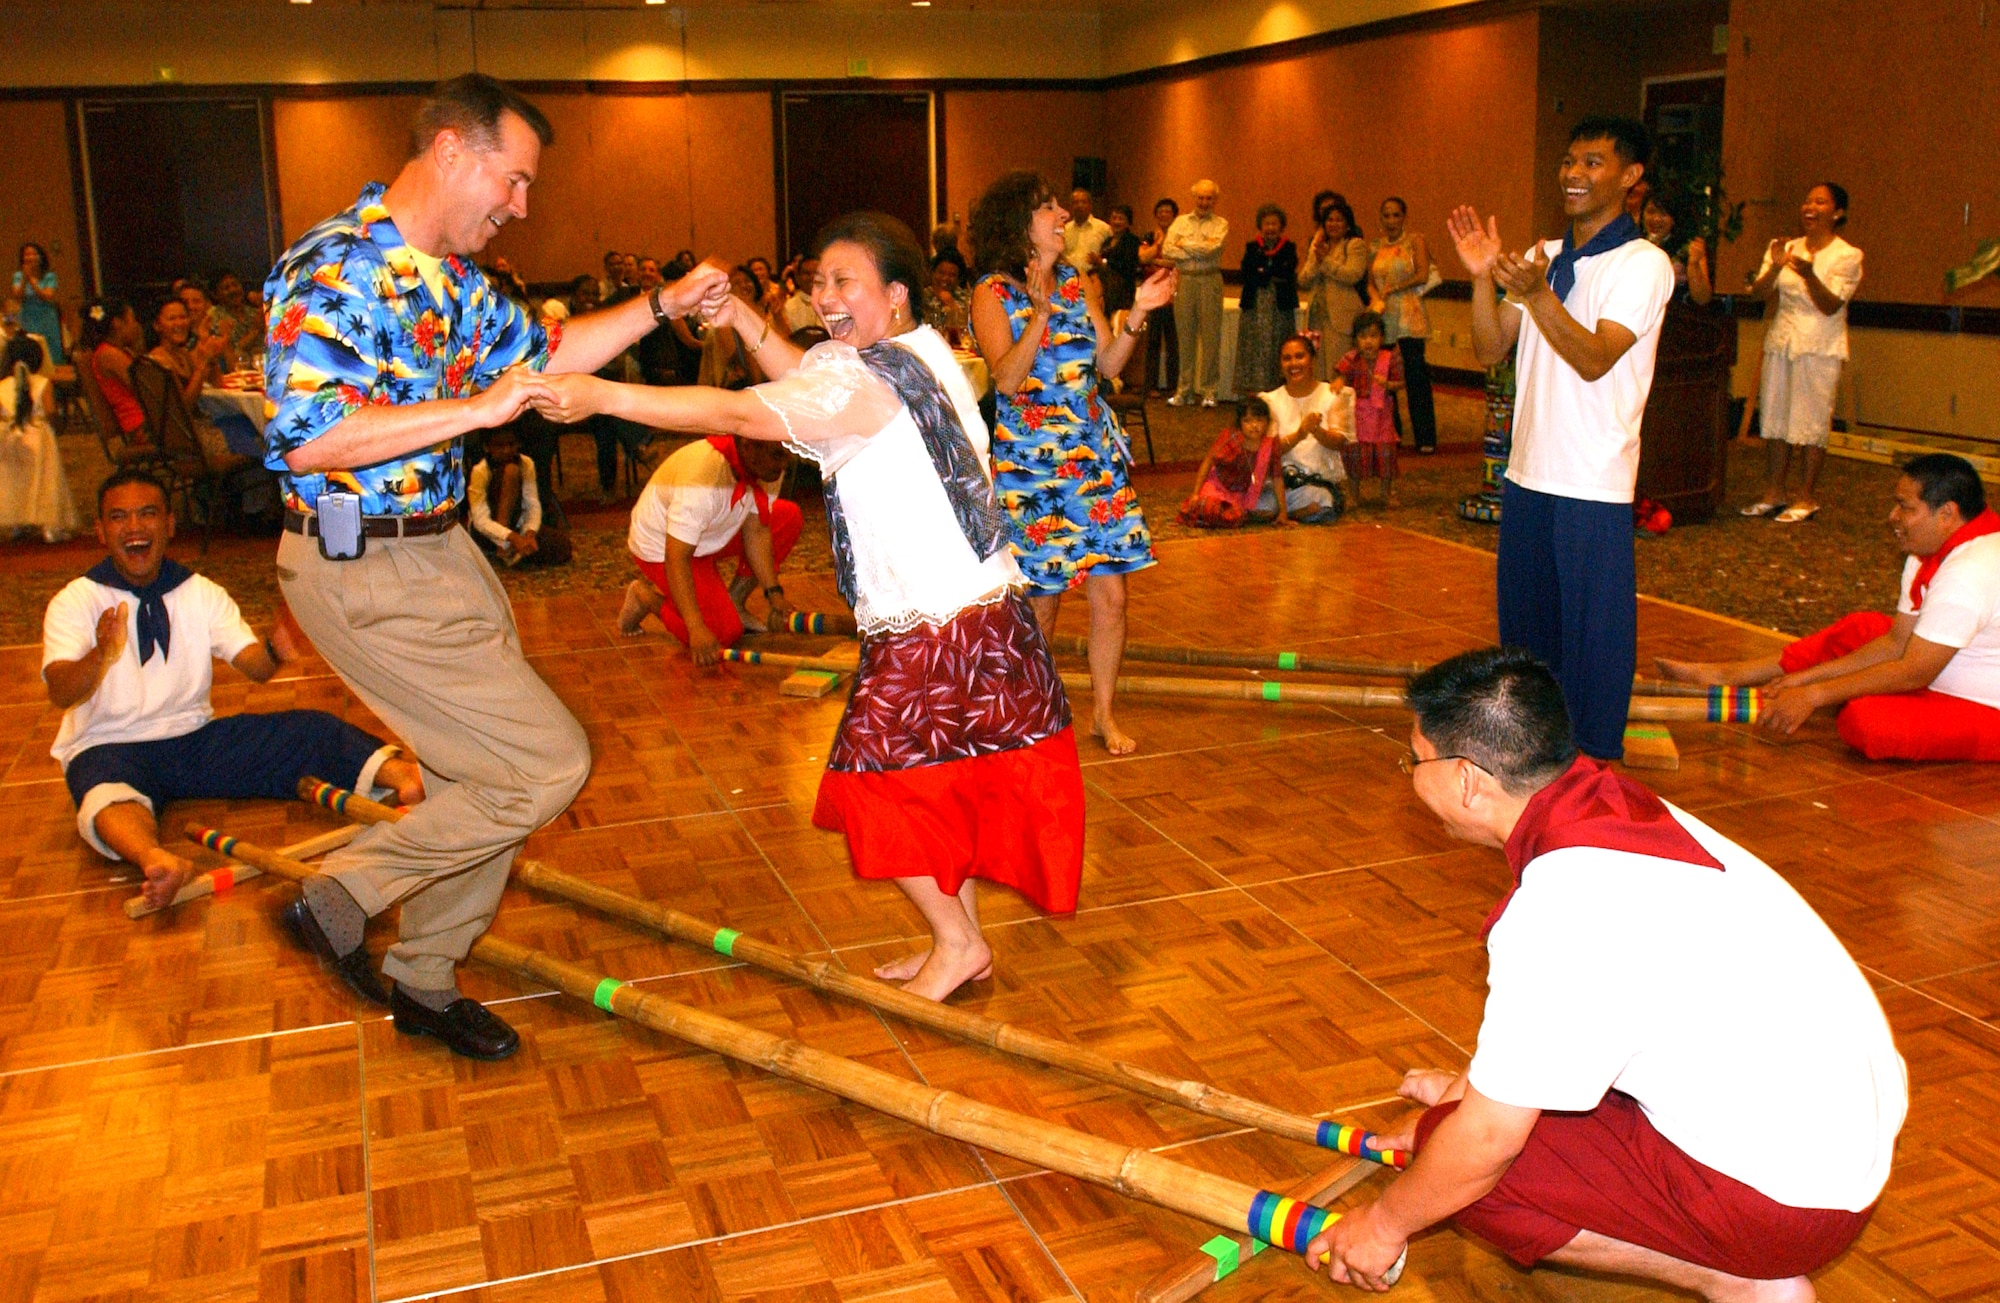 Col. Steve Arquiette, 60th Air Mobility Wing commander, performs the Tinikling, the Philippines’ national dance, with Carrie Basaca, Travis Youth Center school age coordinator, during the Asian Pacific American Heritage Banquet May 30. The Tinikling is a fast rhythmic dance that mimics the movements of the “tikling” birds in the rice fields in their effort to avoid being clipped with the bamboo traps. (U.S. Air Force photo by Nan Wylie)





